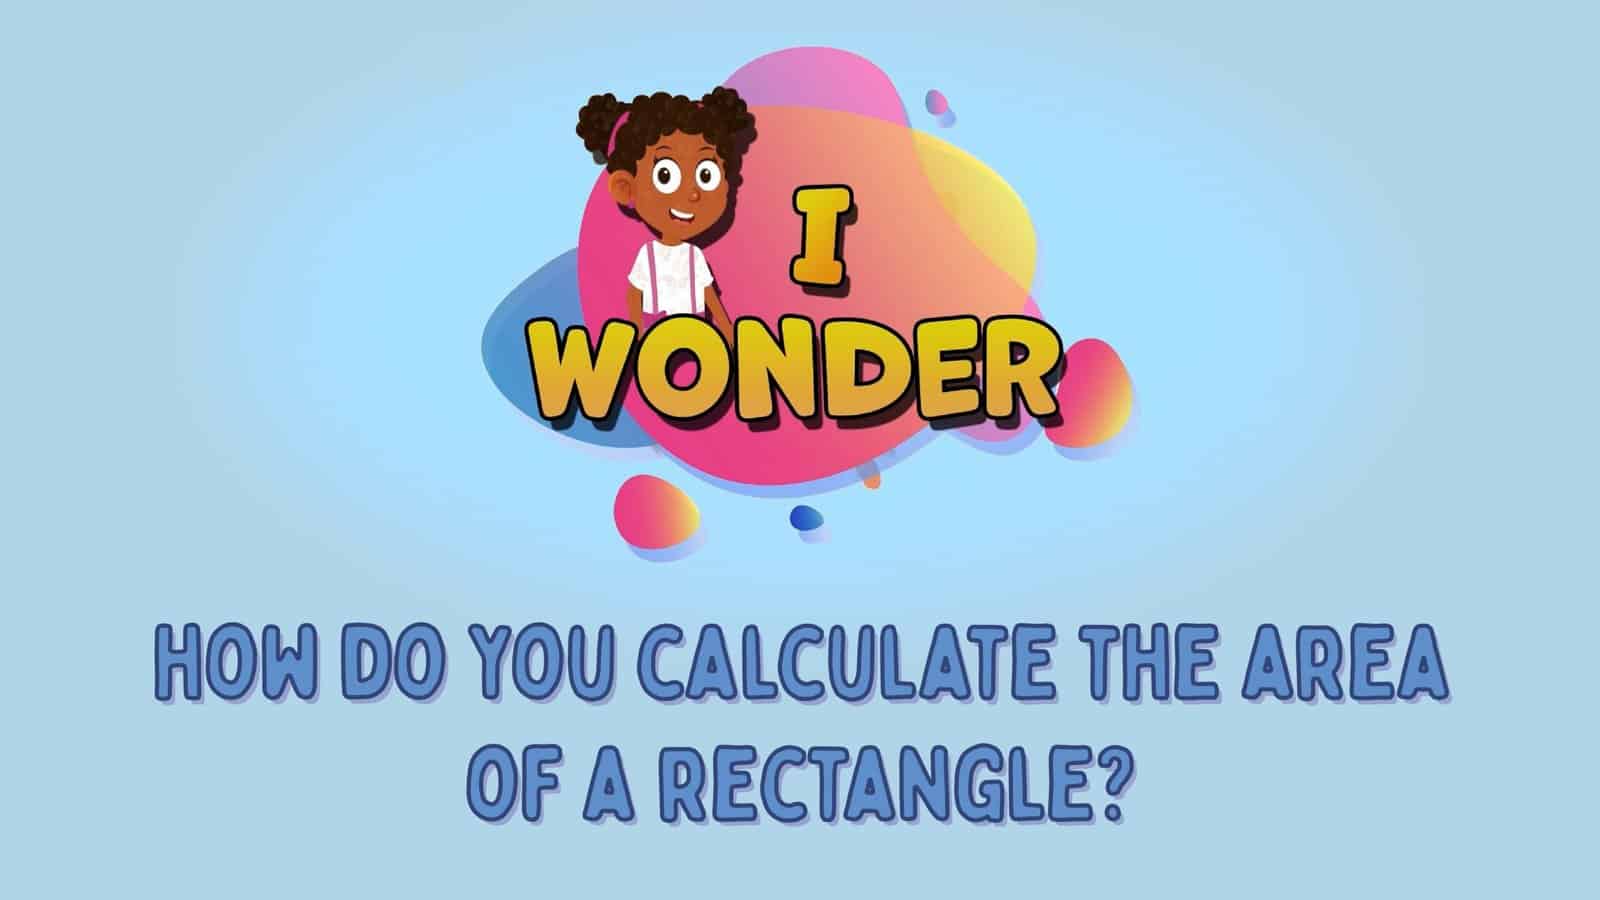 How Do You Calculate The Area Of A Rectangle?